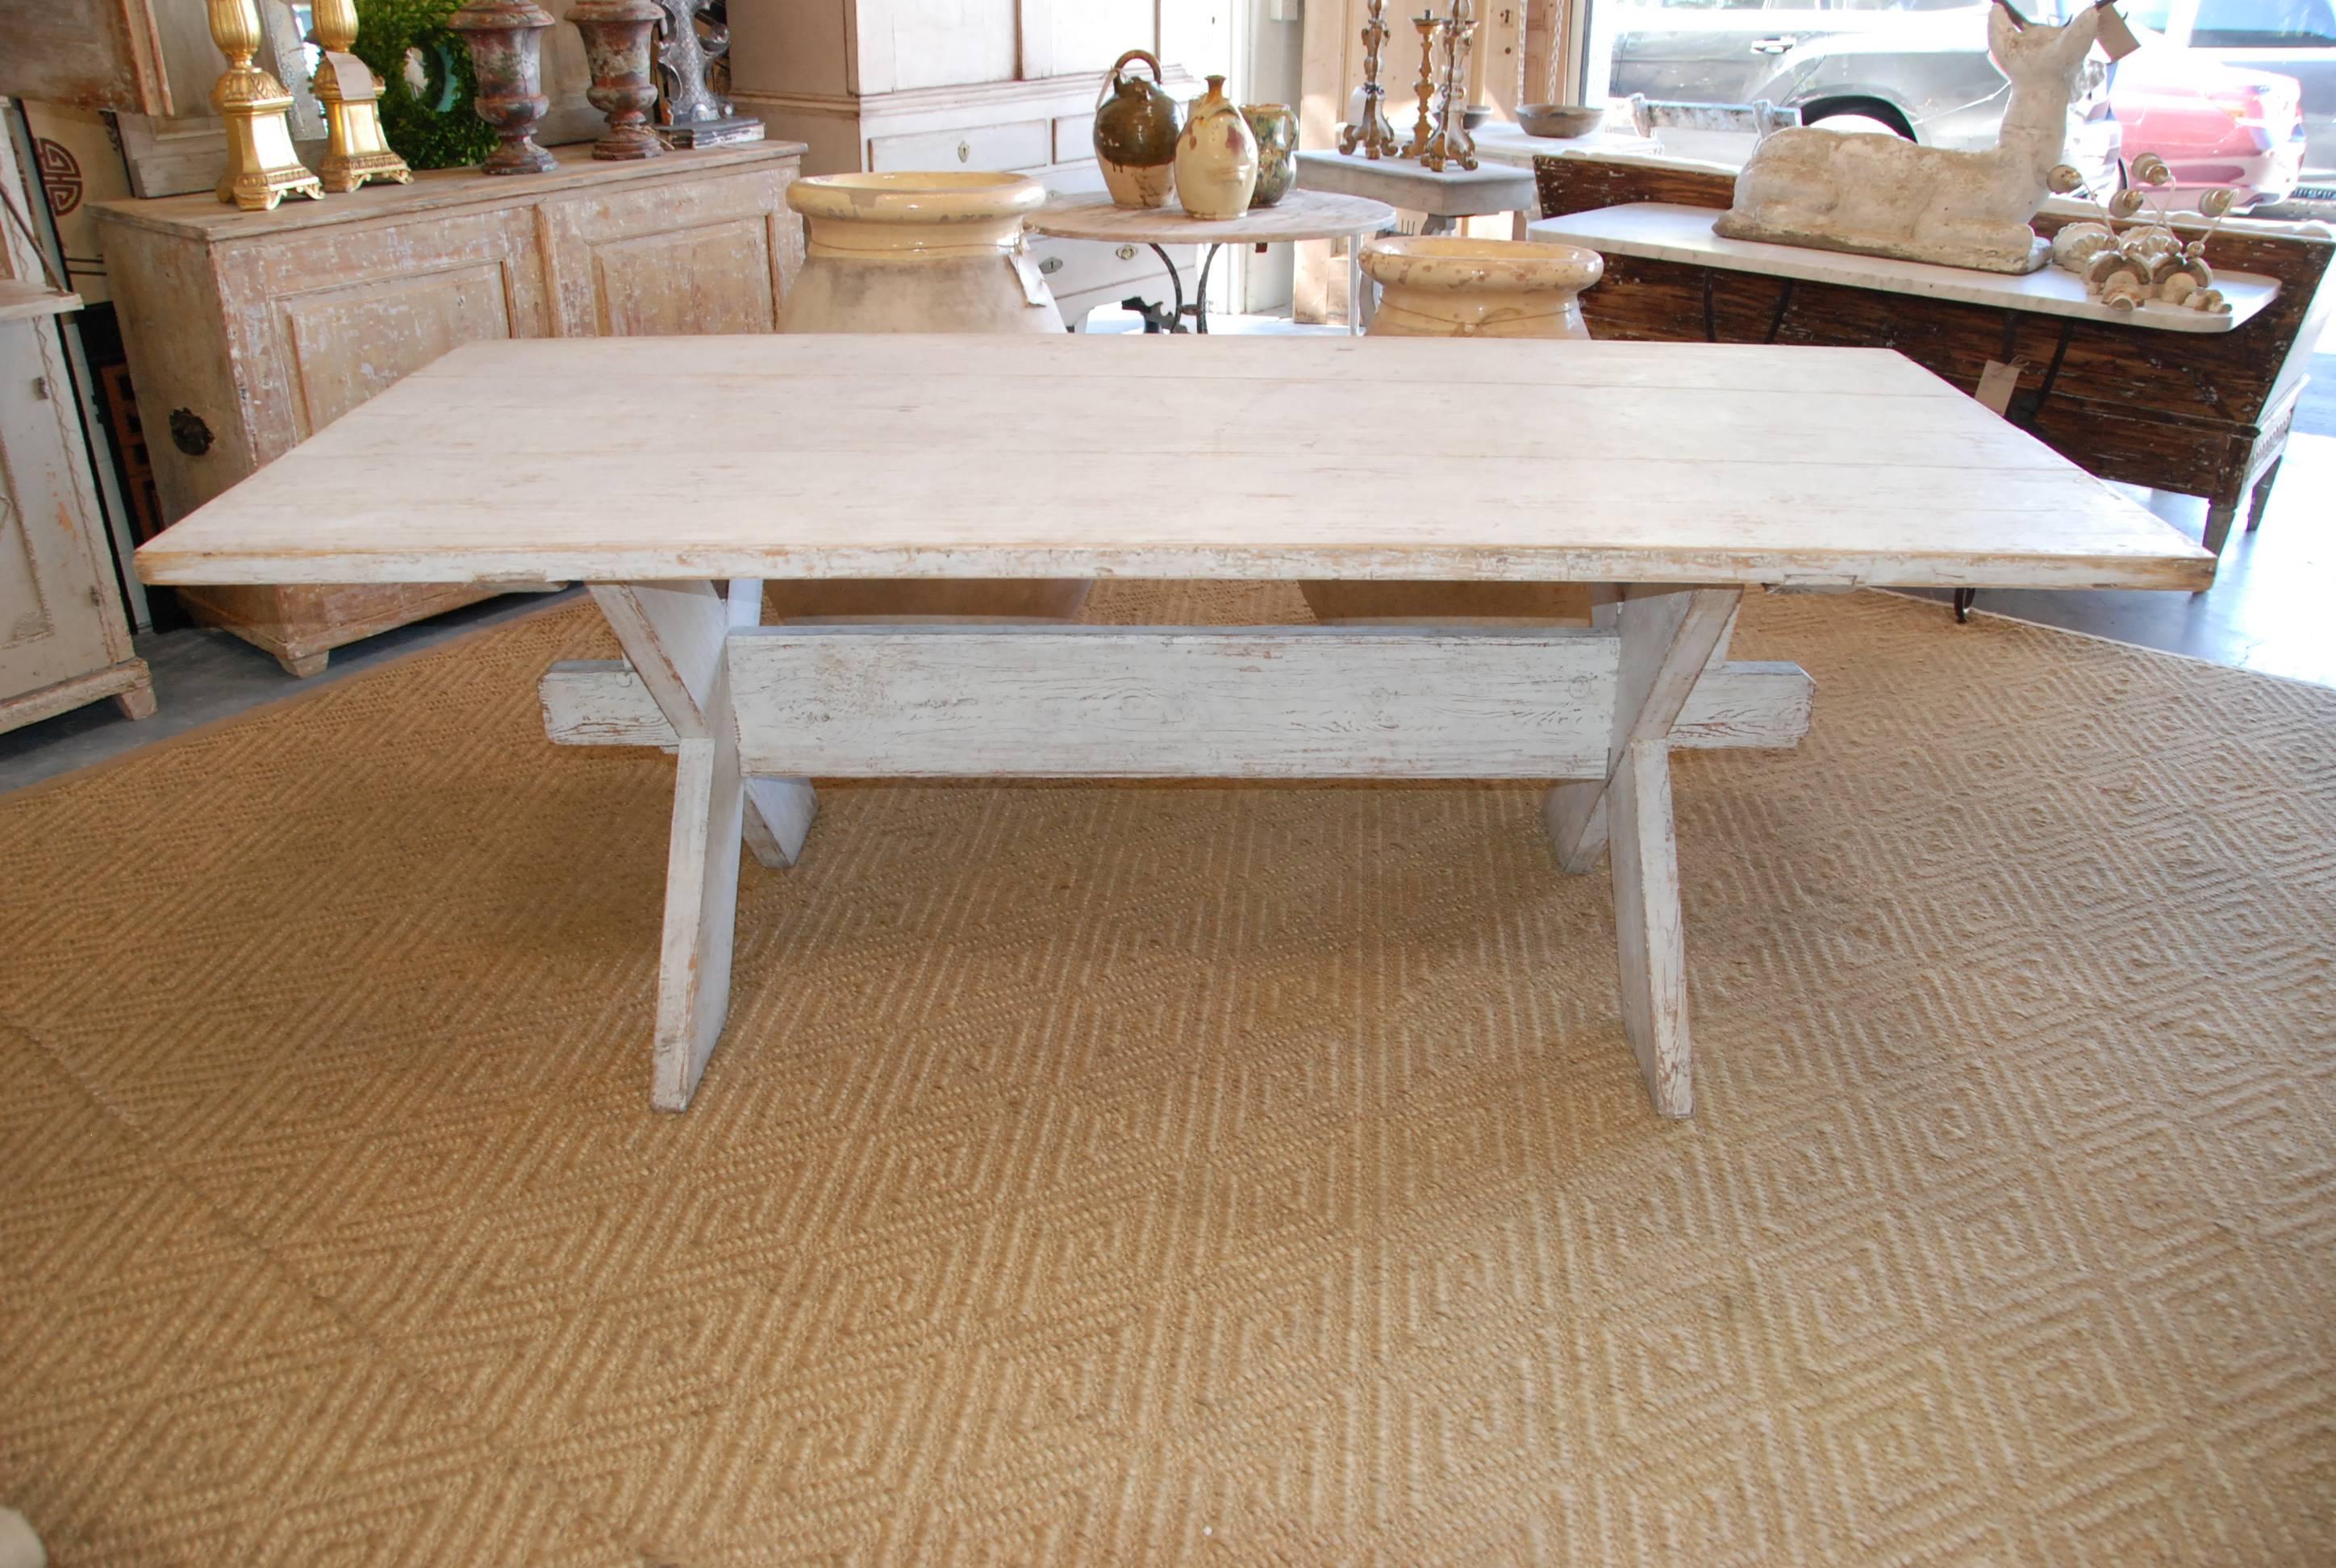 Lovely cream/ white colored 19th century Swedish stretcher farm table. Great size for lots of seating for the holidays.